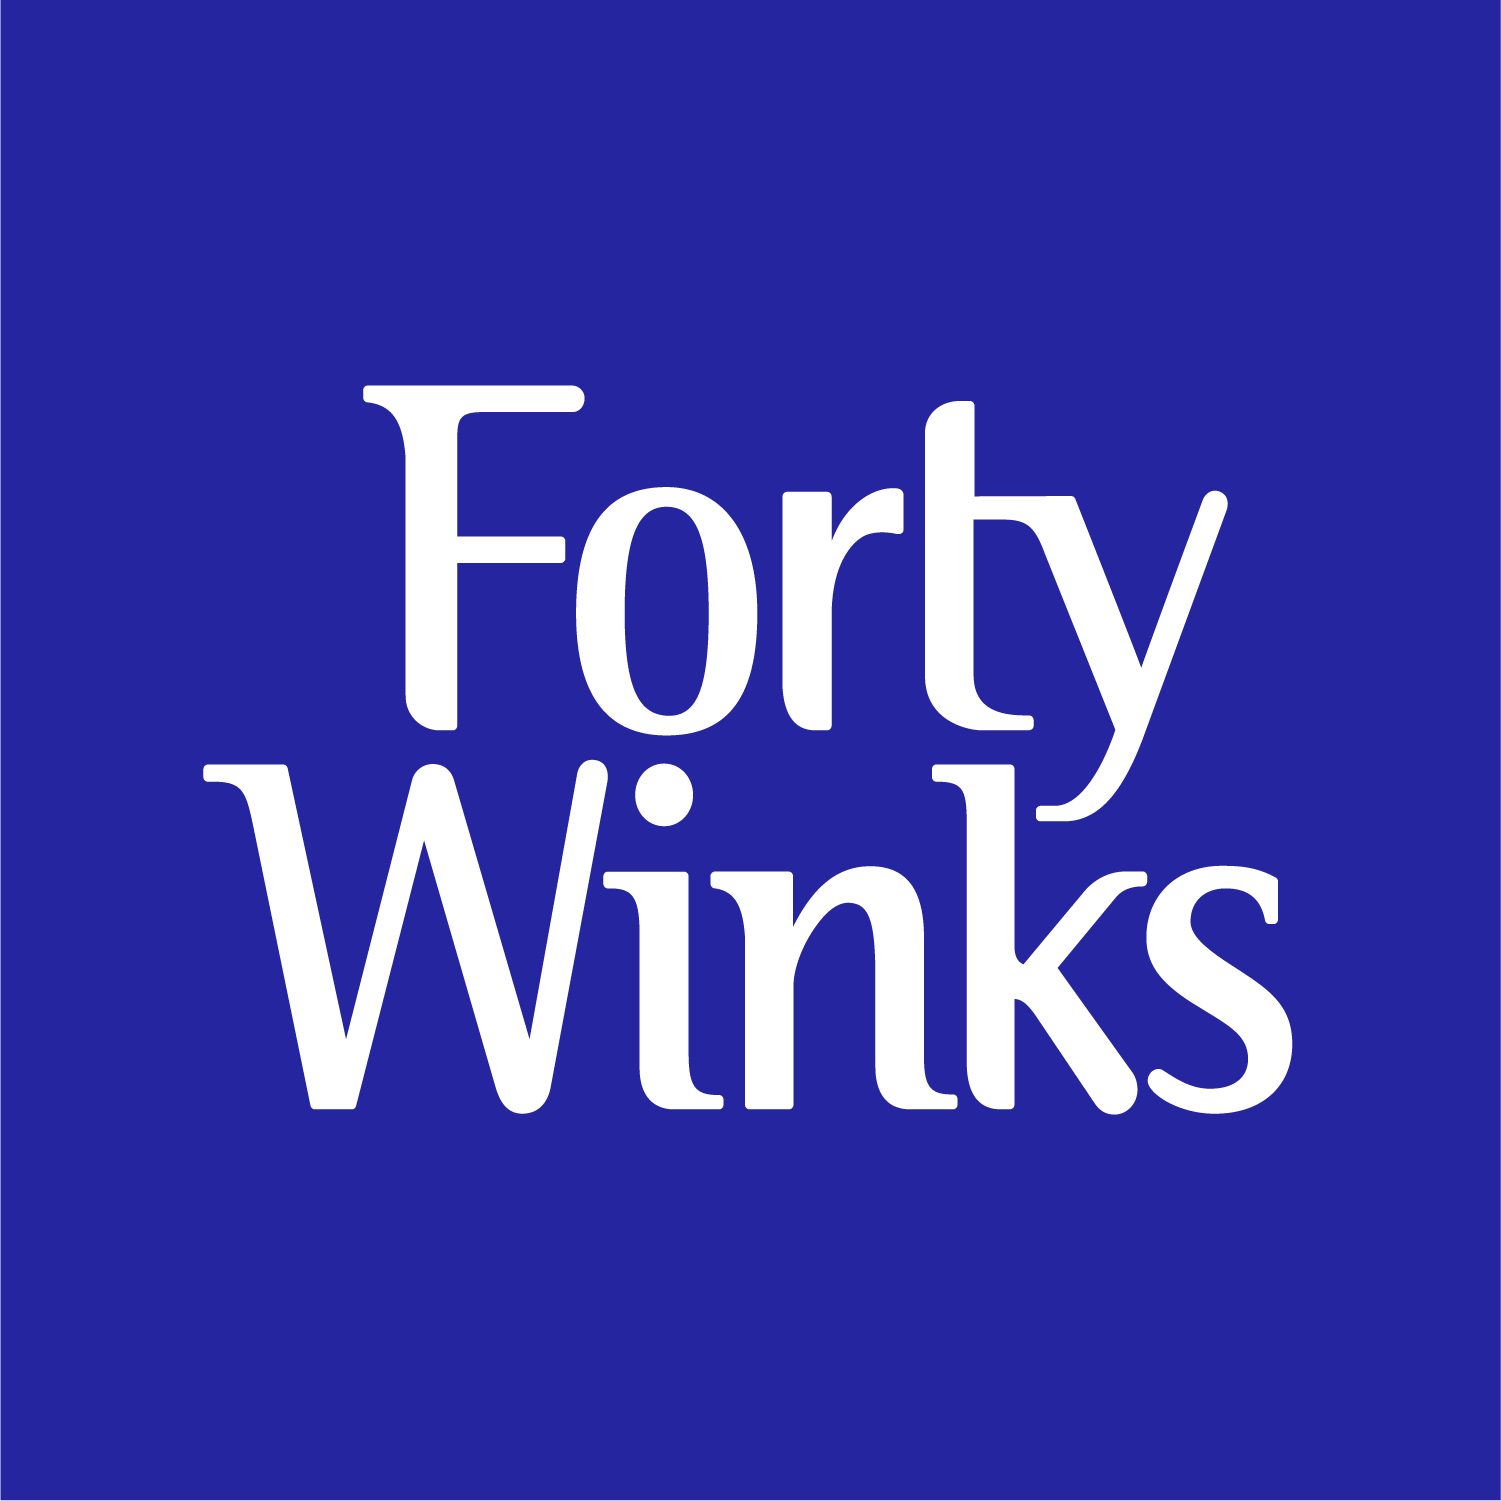 Company logo of Forty Winks